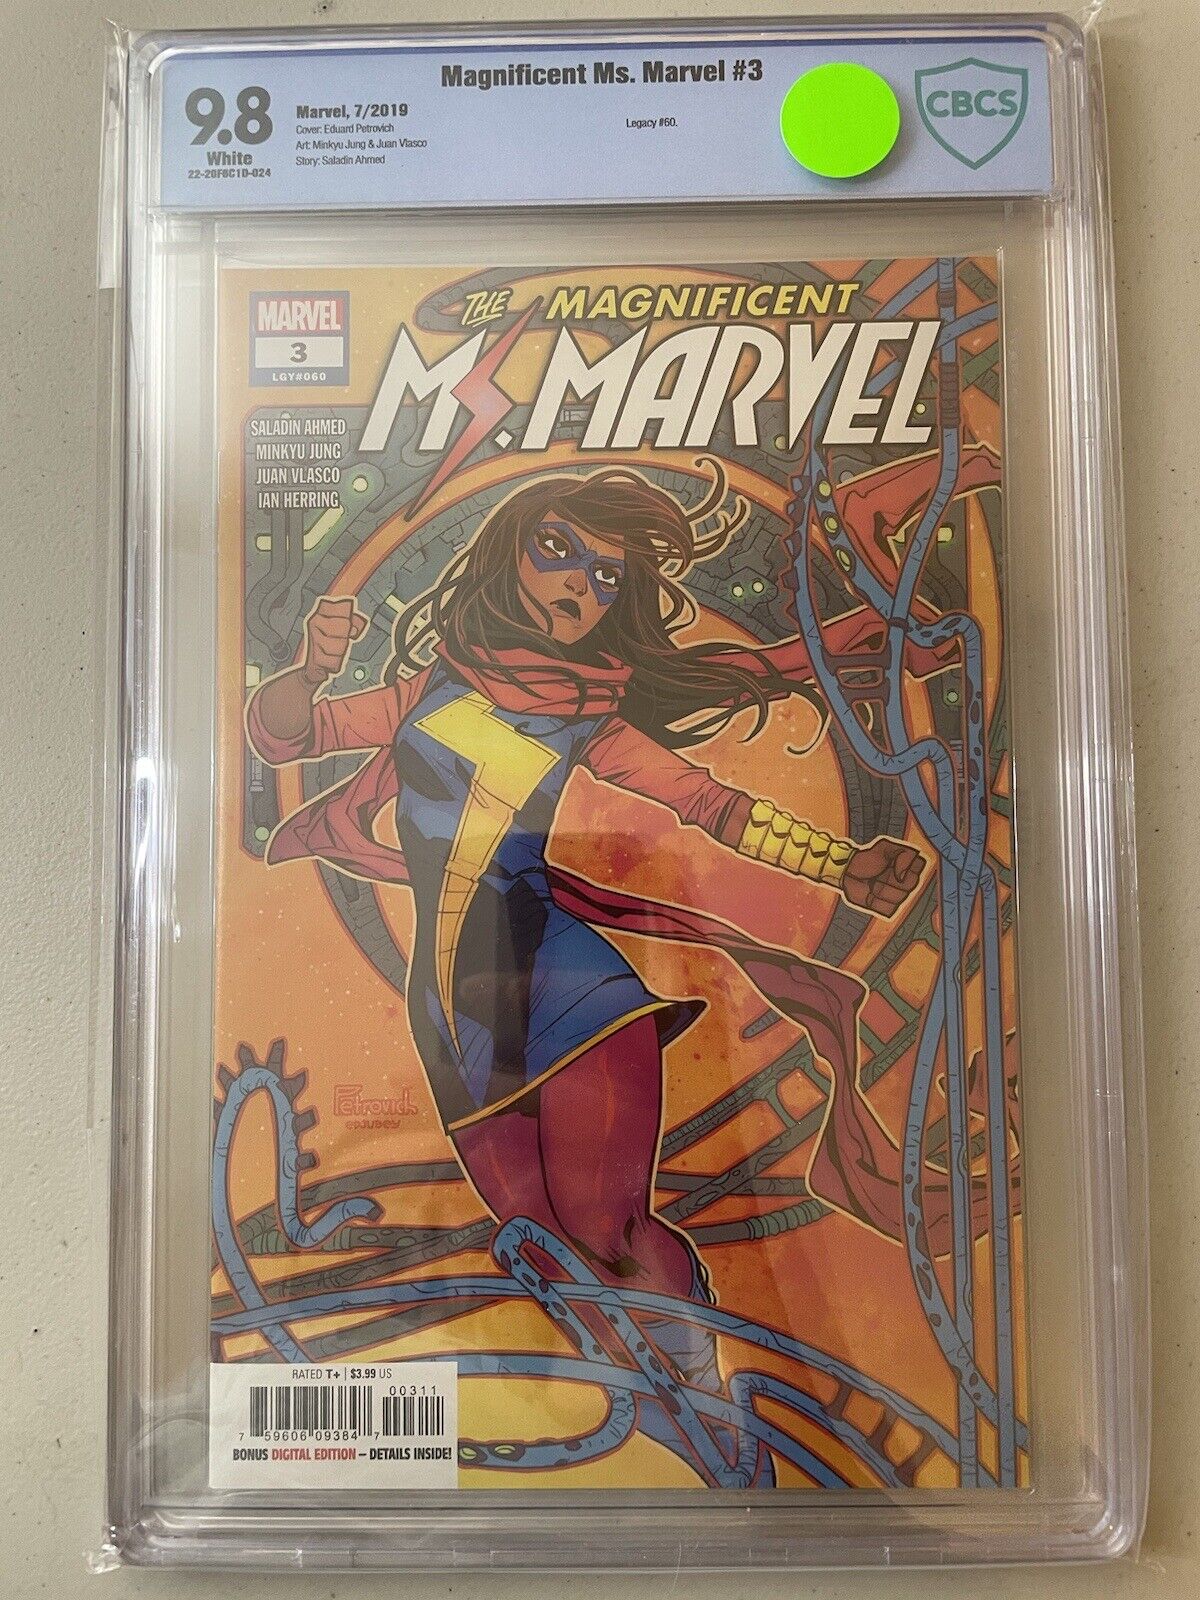 The Magnificent Ms. Marvel #3 CBCS 9.8 Edward Petrovich Cover A Ships Free